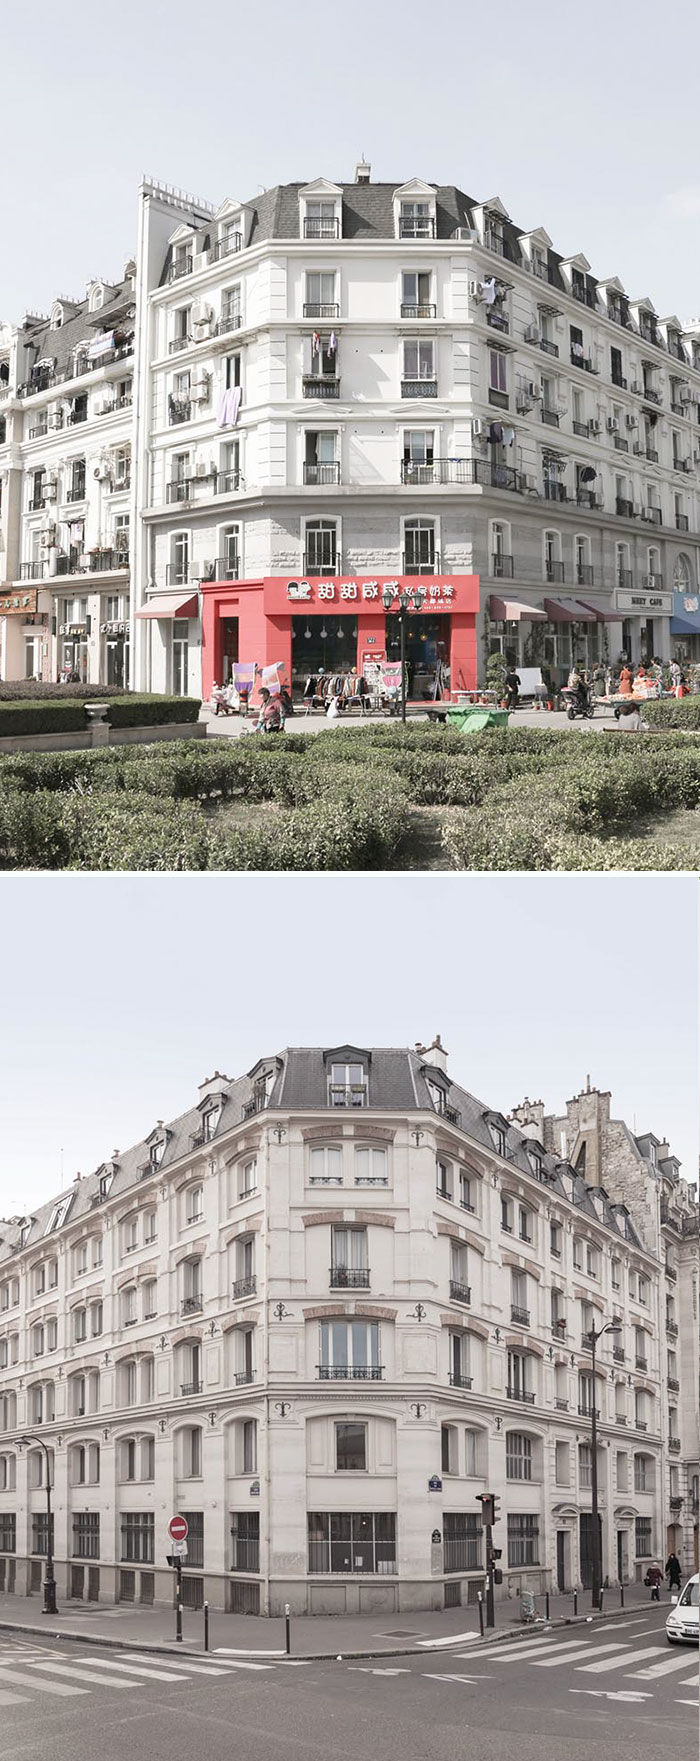 tianducheng-china-knockoff-architecture-paris-syndrome-francois-prost-1-5aafb44cadd7a__700